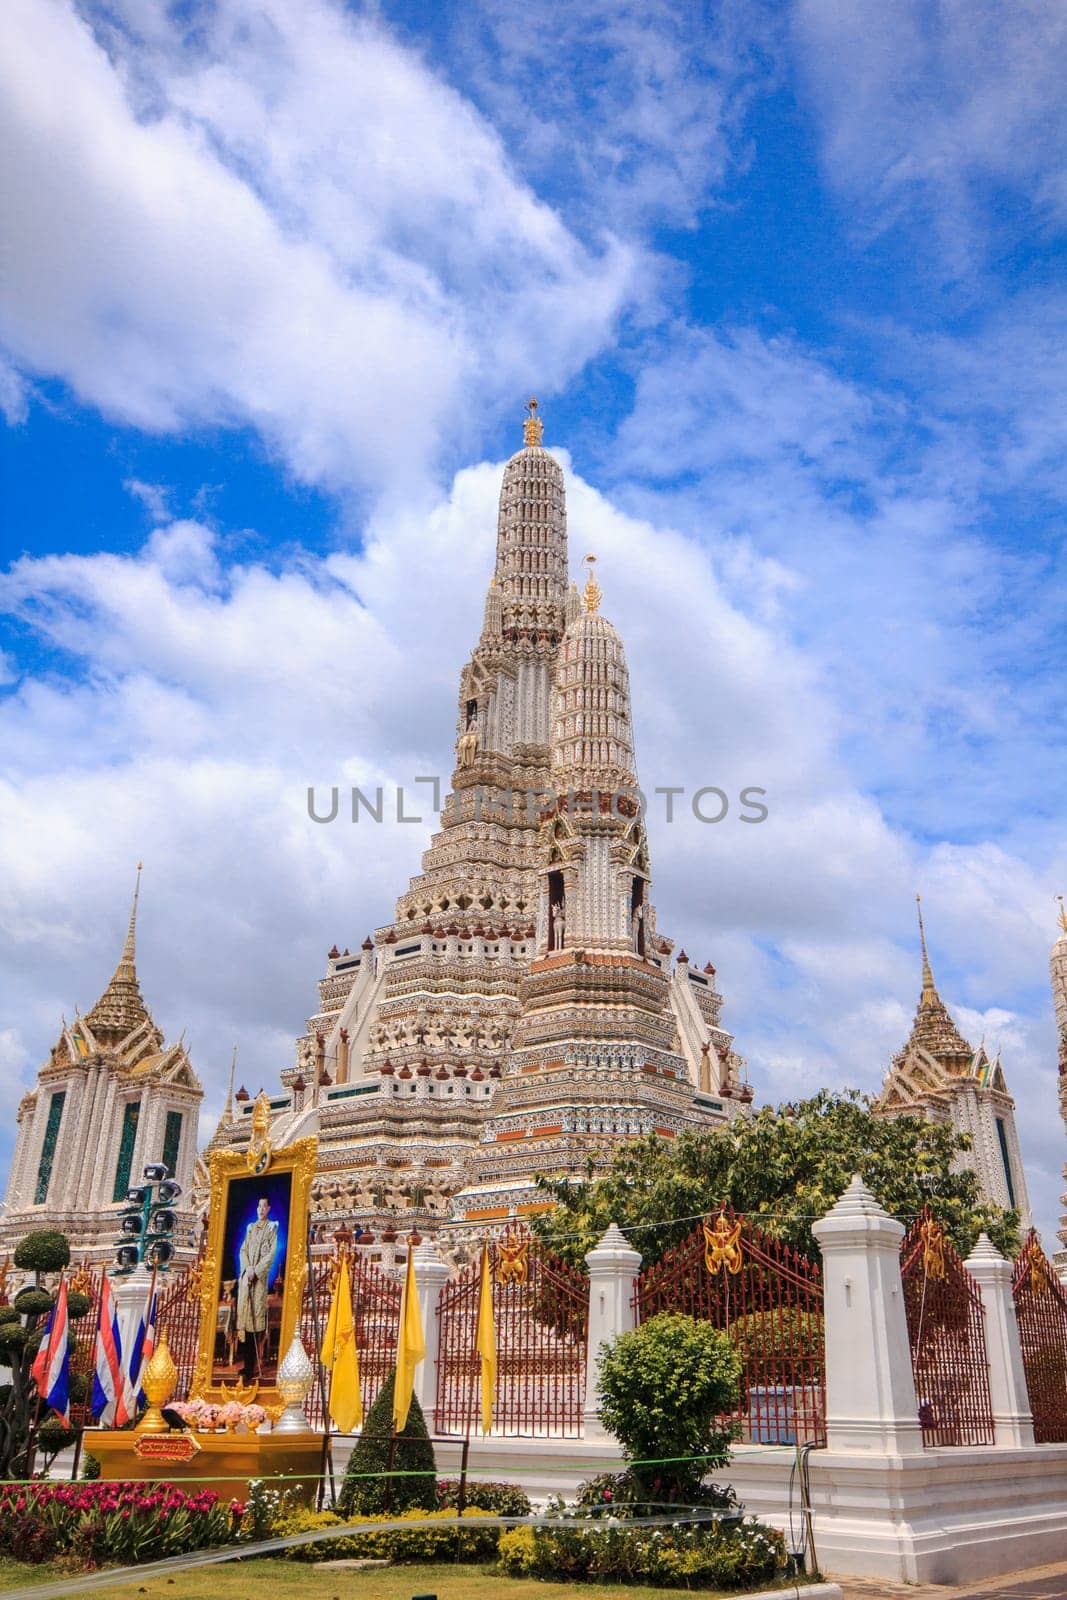 Arunratchawararam Temple is an important and ancient temple in Thailand.